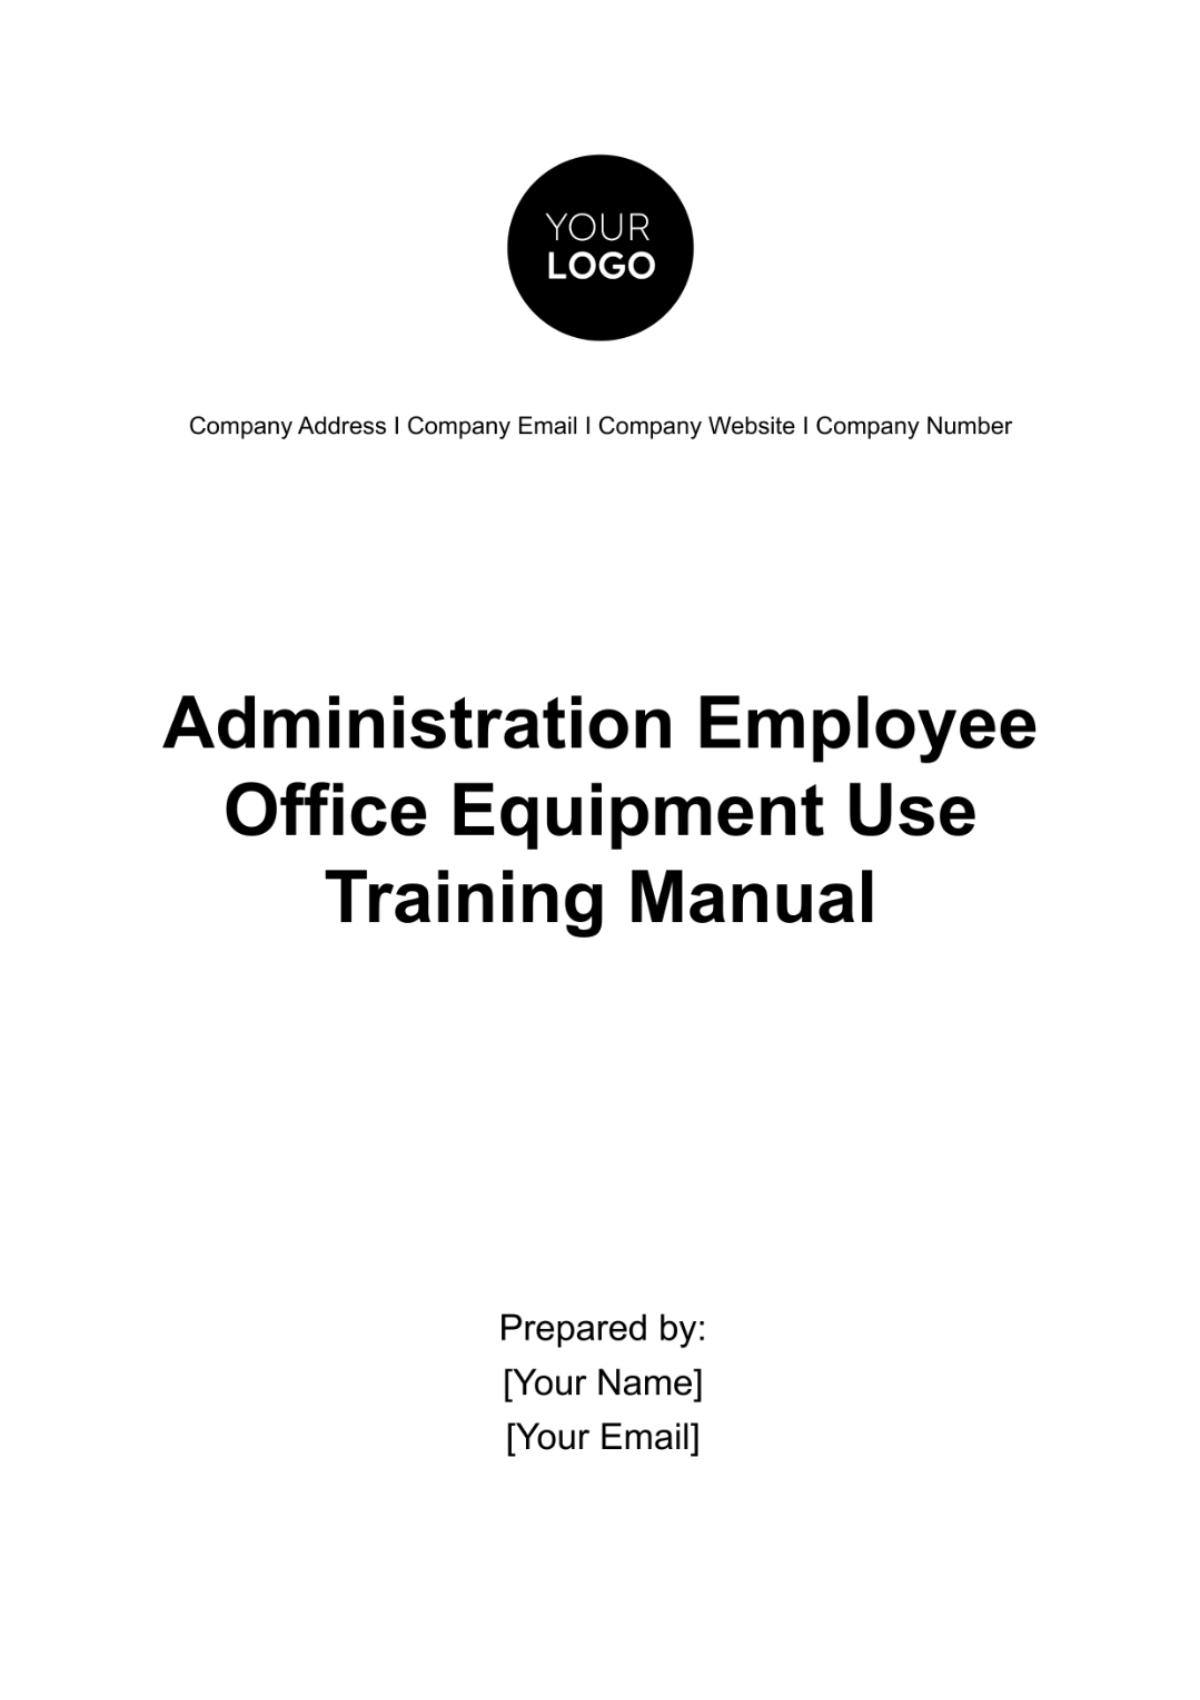 Free Administration Employee Office Equipment Use Training Manual Template